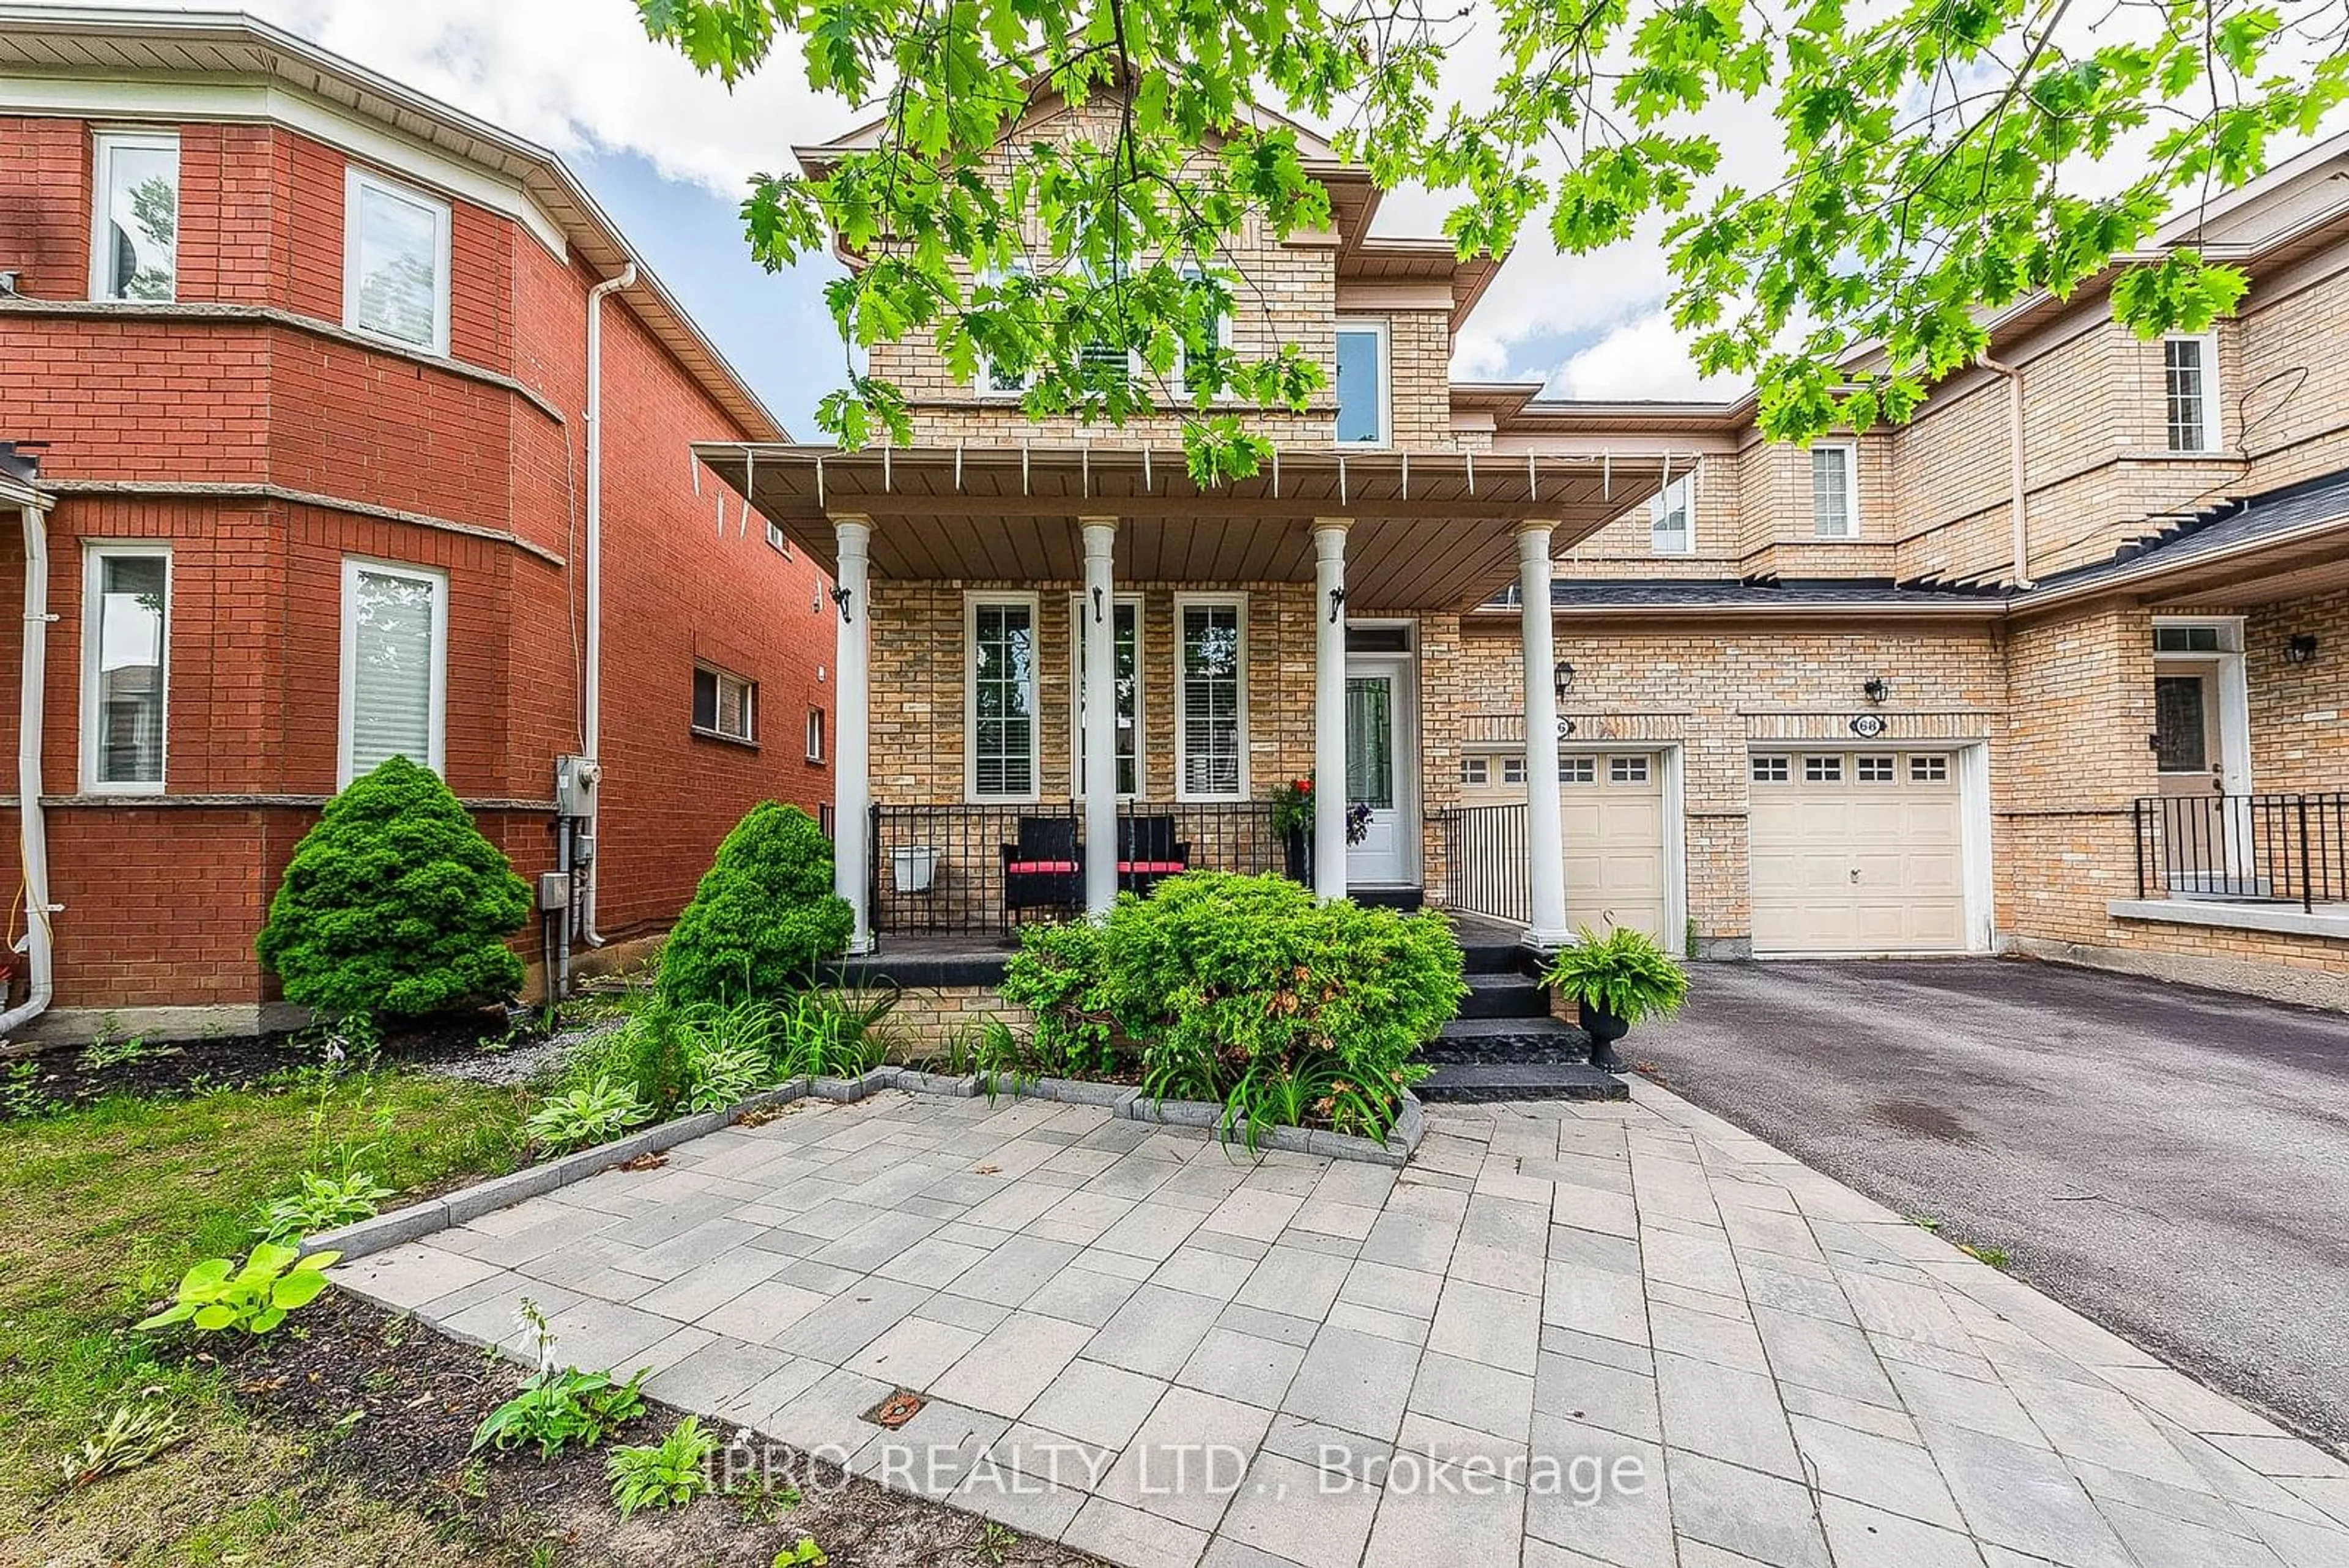 Home with brick exterior material for 66 Skylark Dr, Vaughan Ontario L4H 2C4